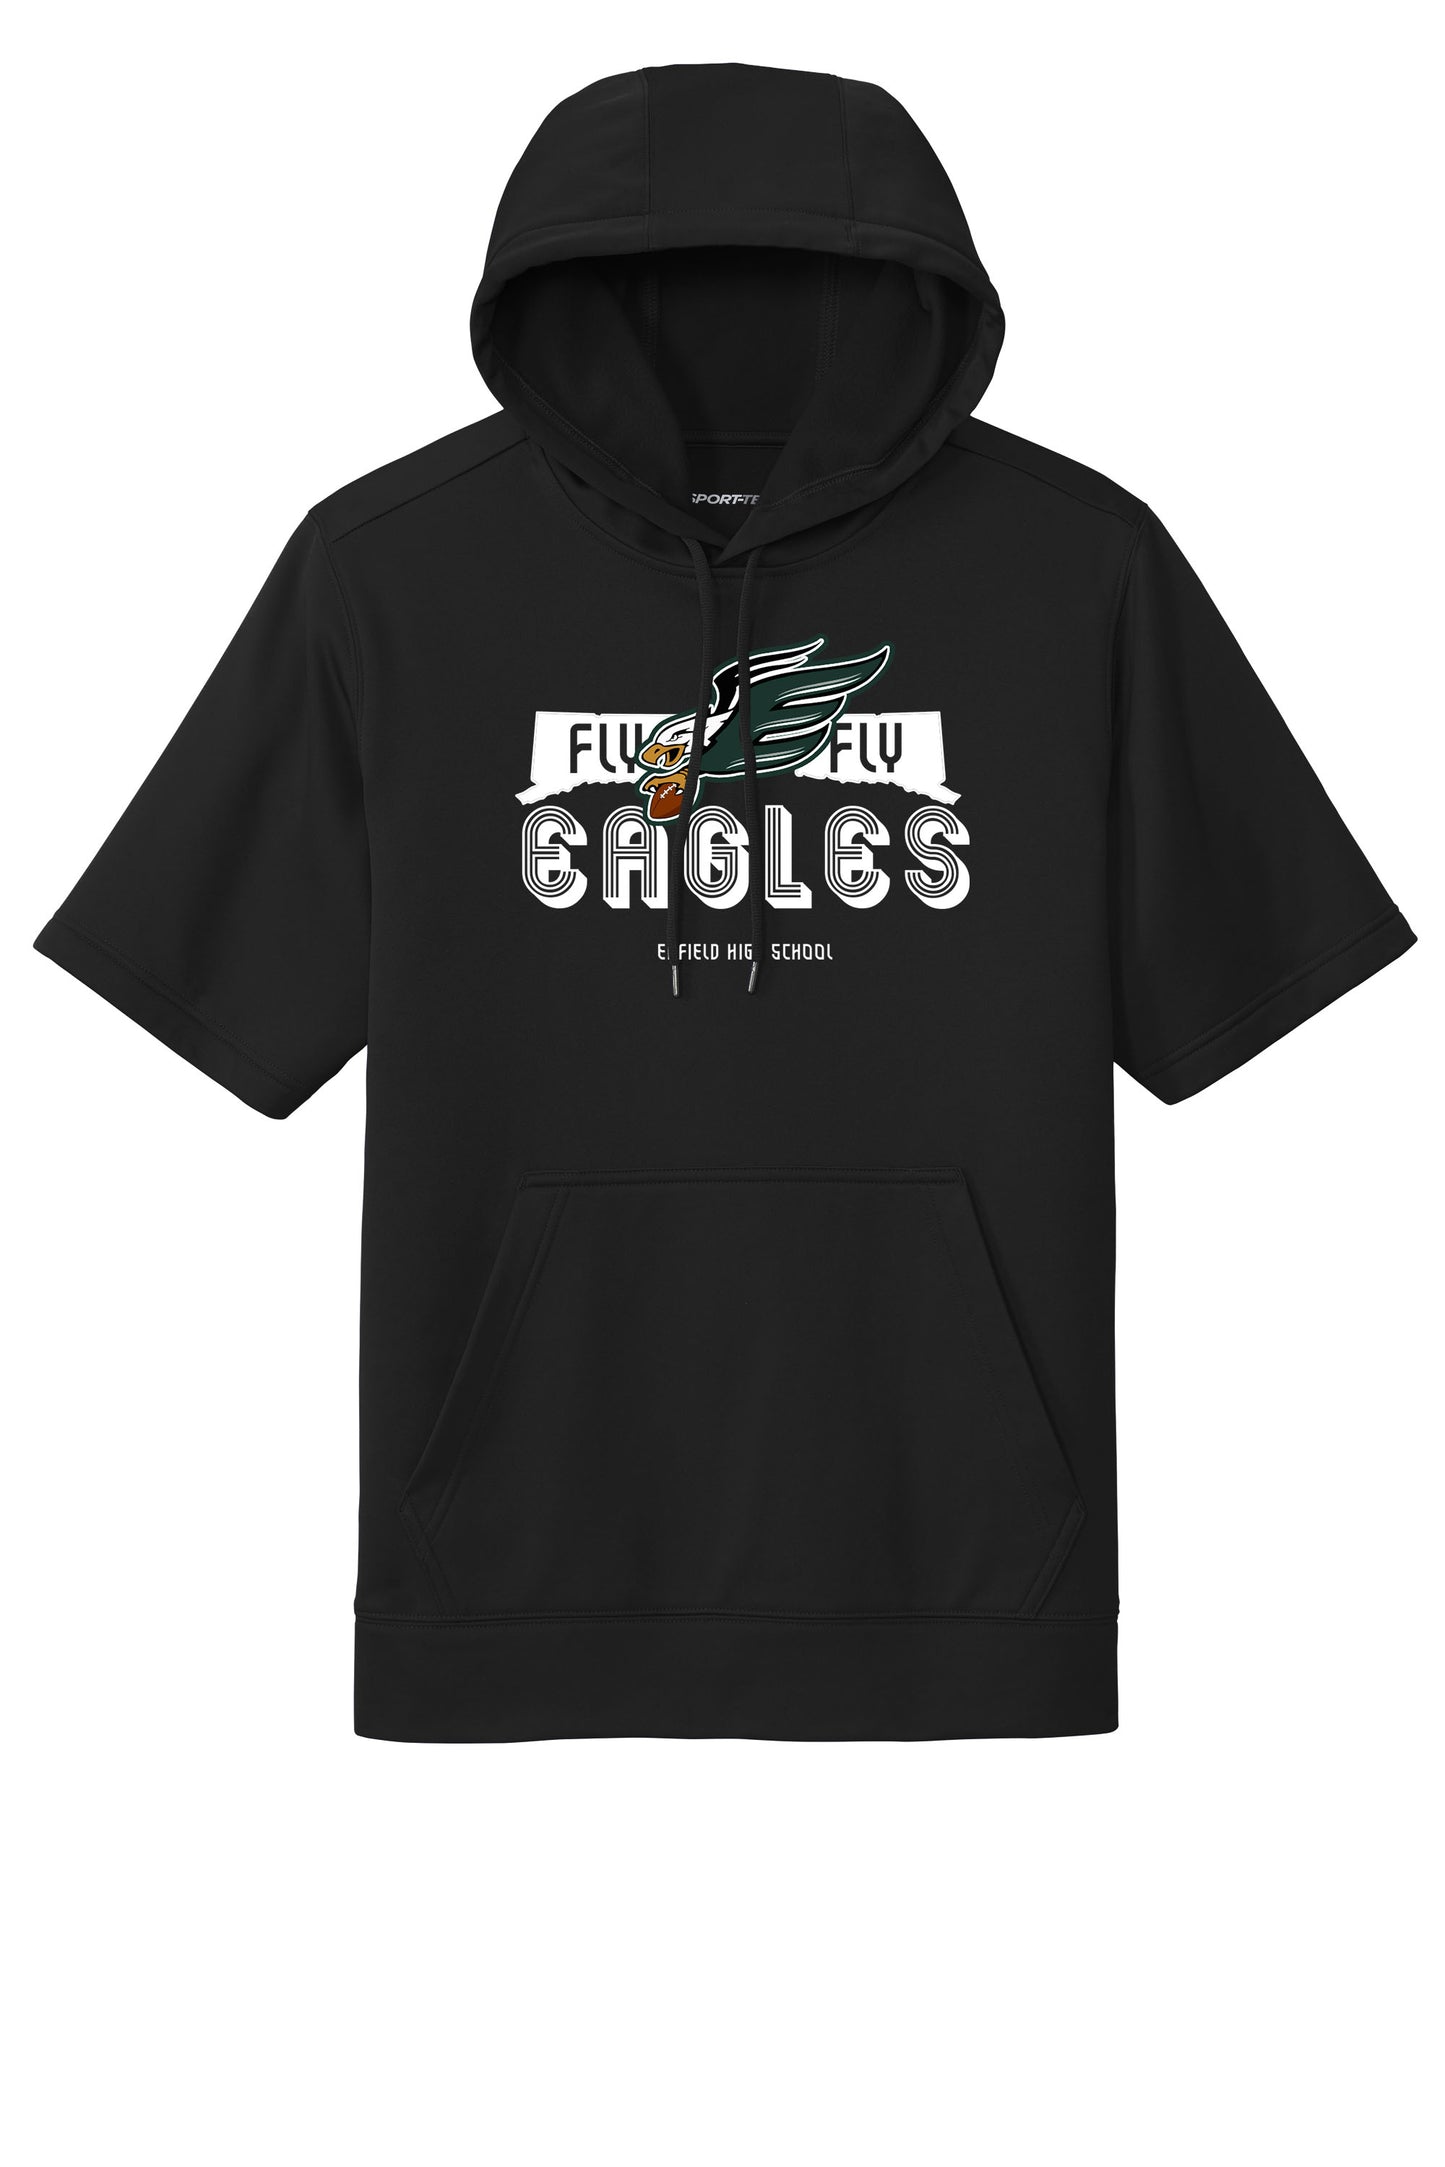 Enfield Eagles Football Adult Wicking Short Sleeve Fleece Hoodie "Fly" - ST251 (color options available)